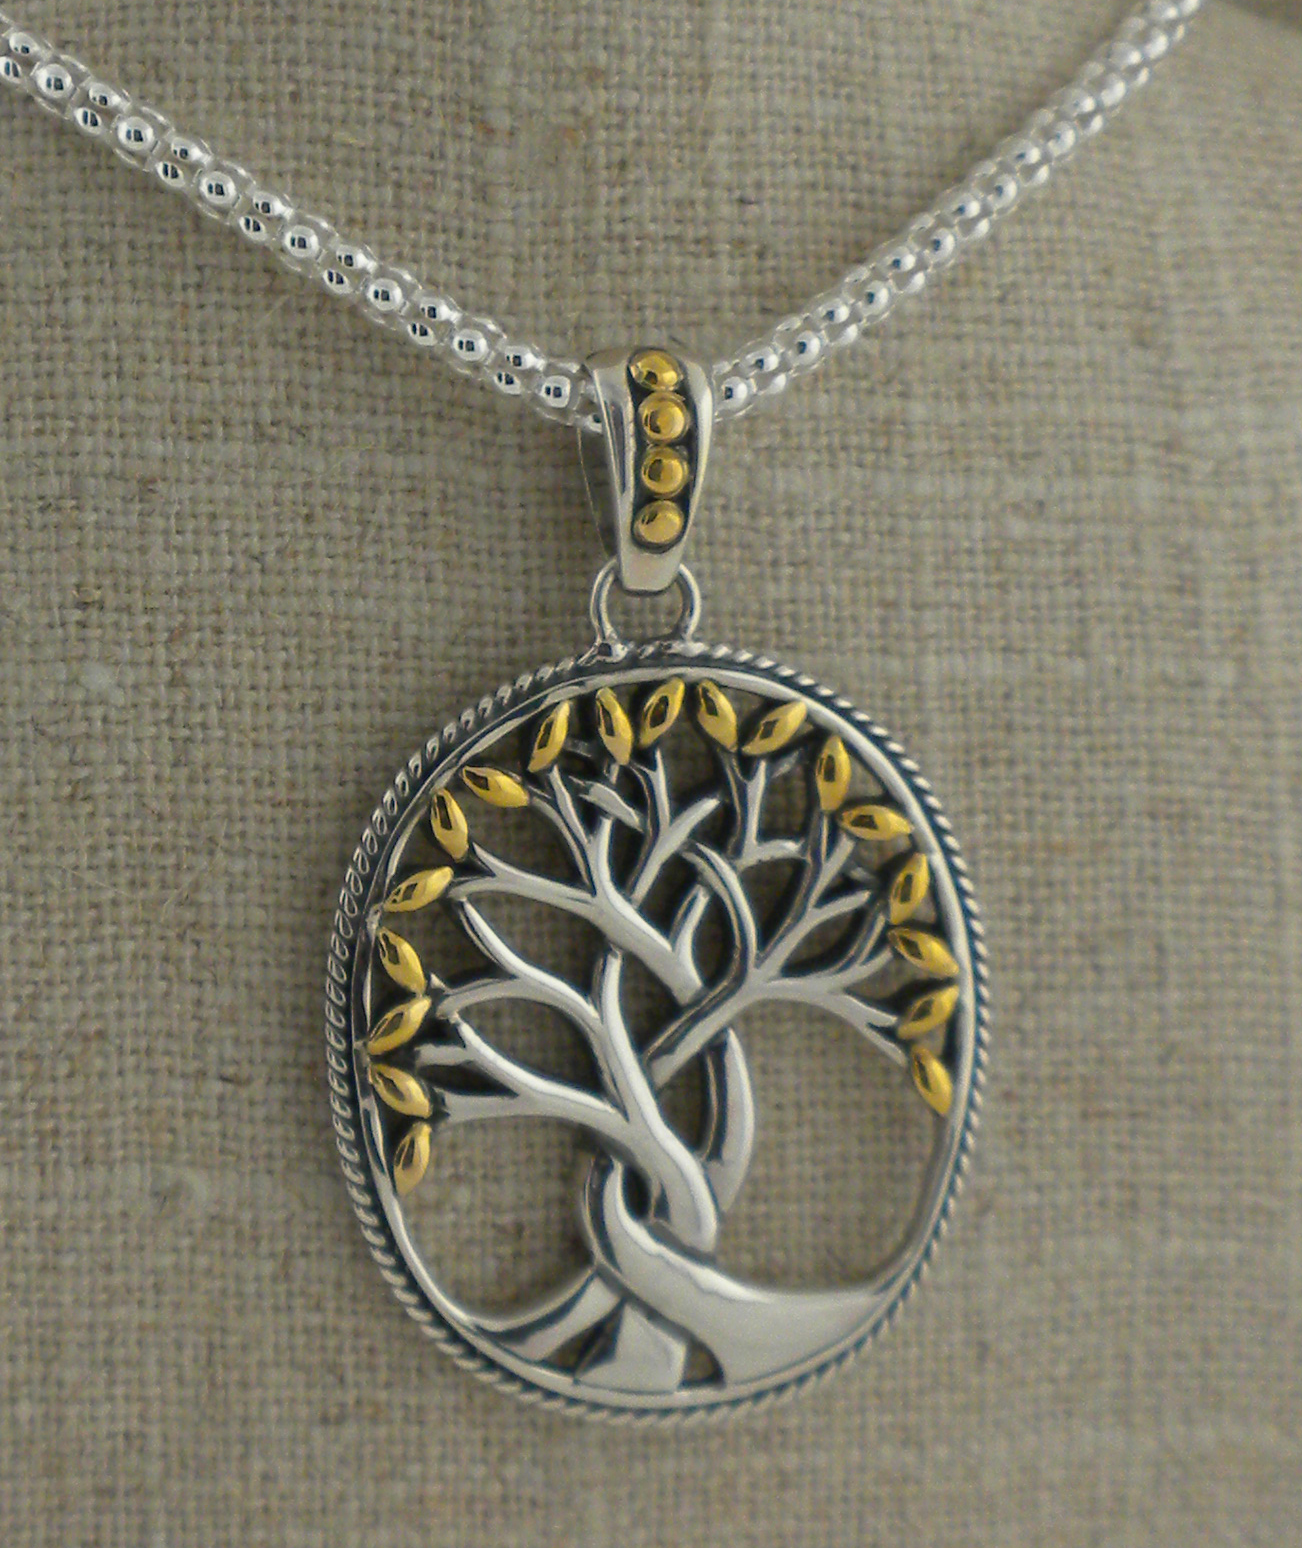 Celtic Tree of Life Pendant in Sterling Silver